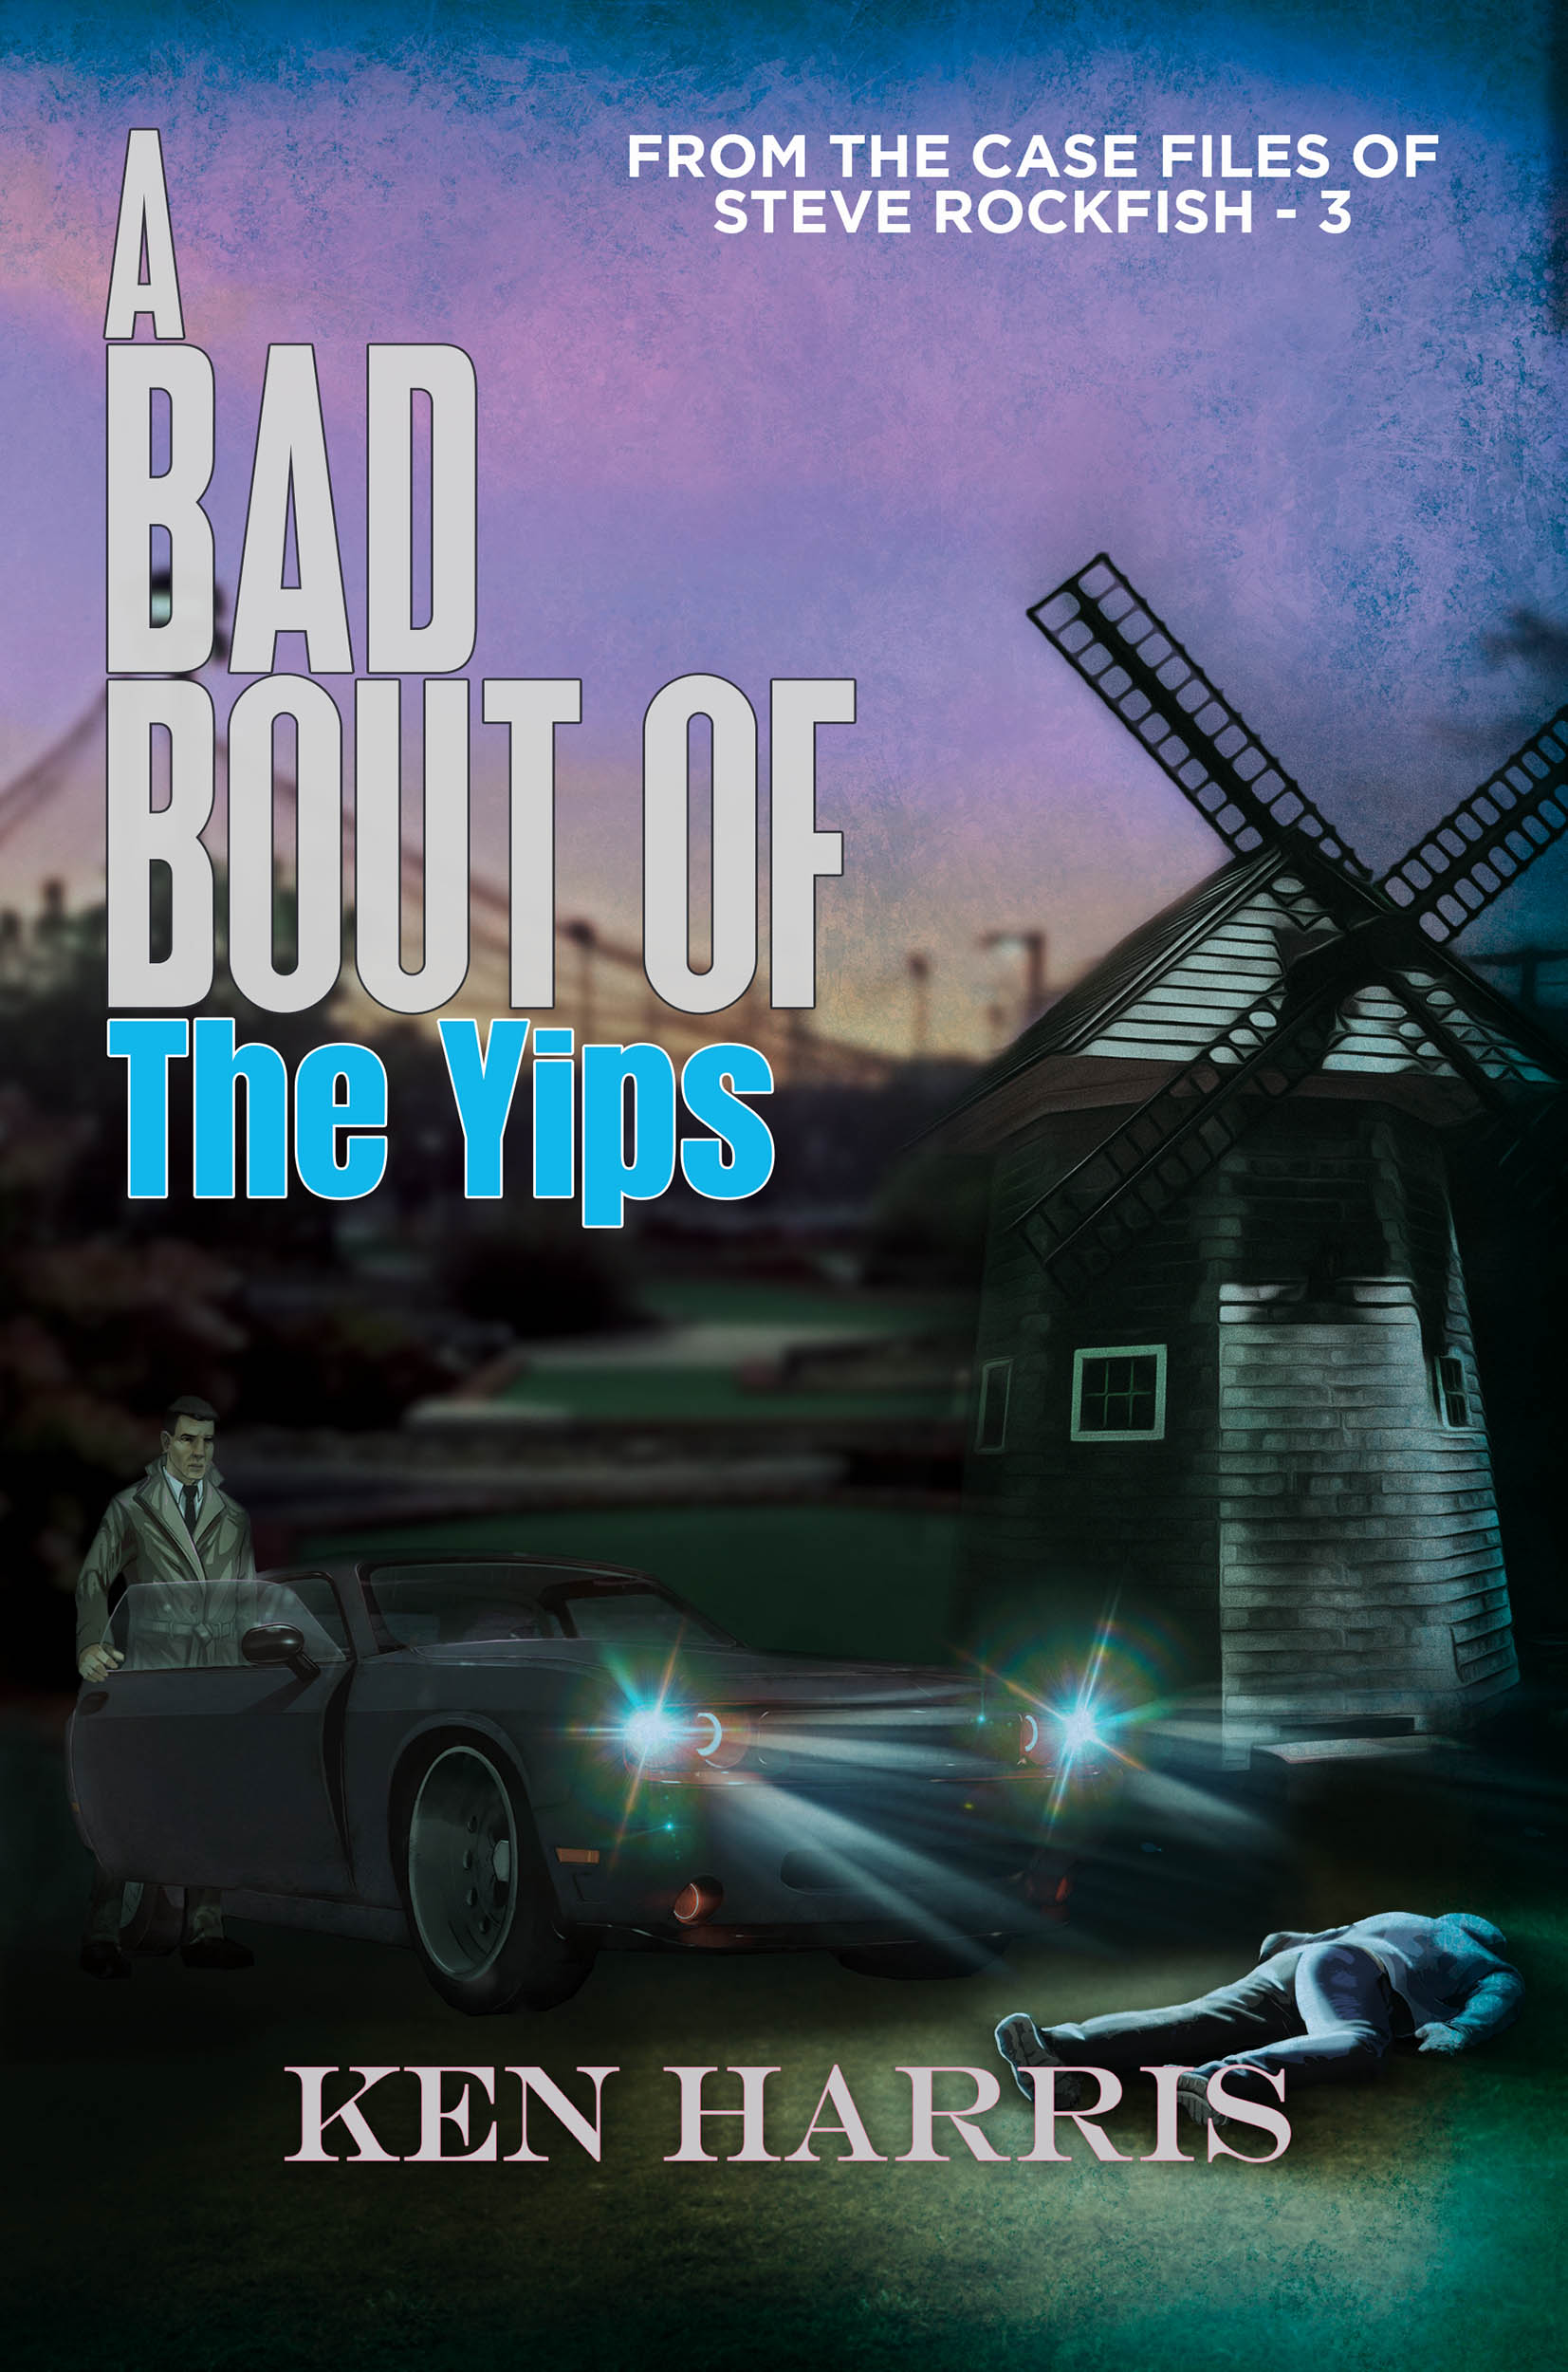 A Bad Bout of the Yips by Ken Harris